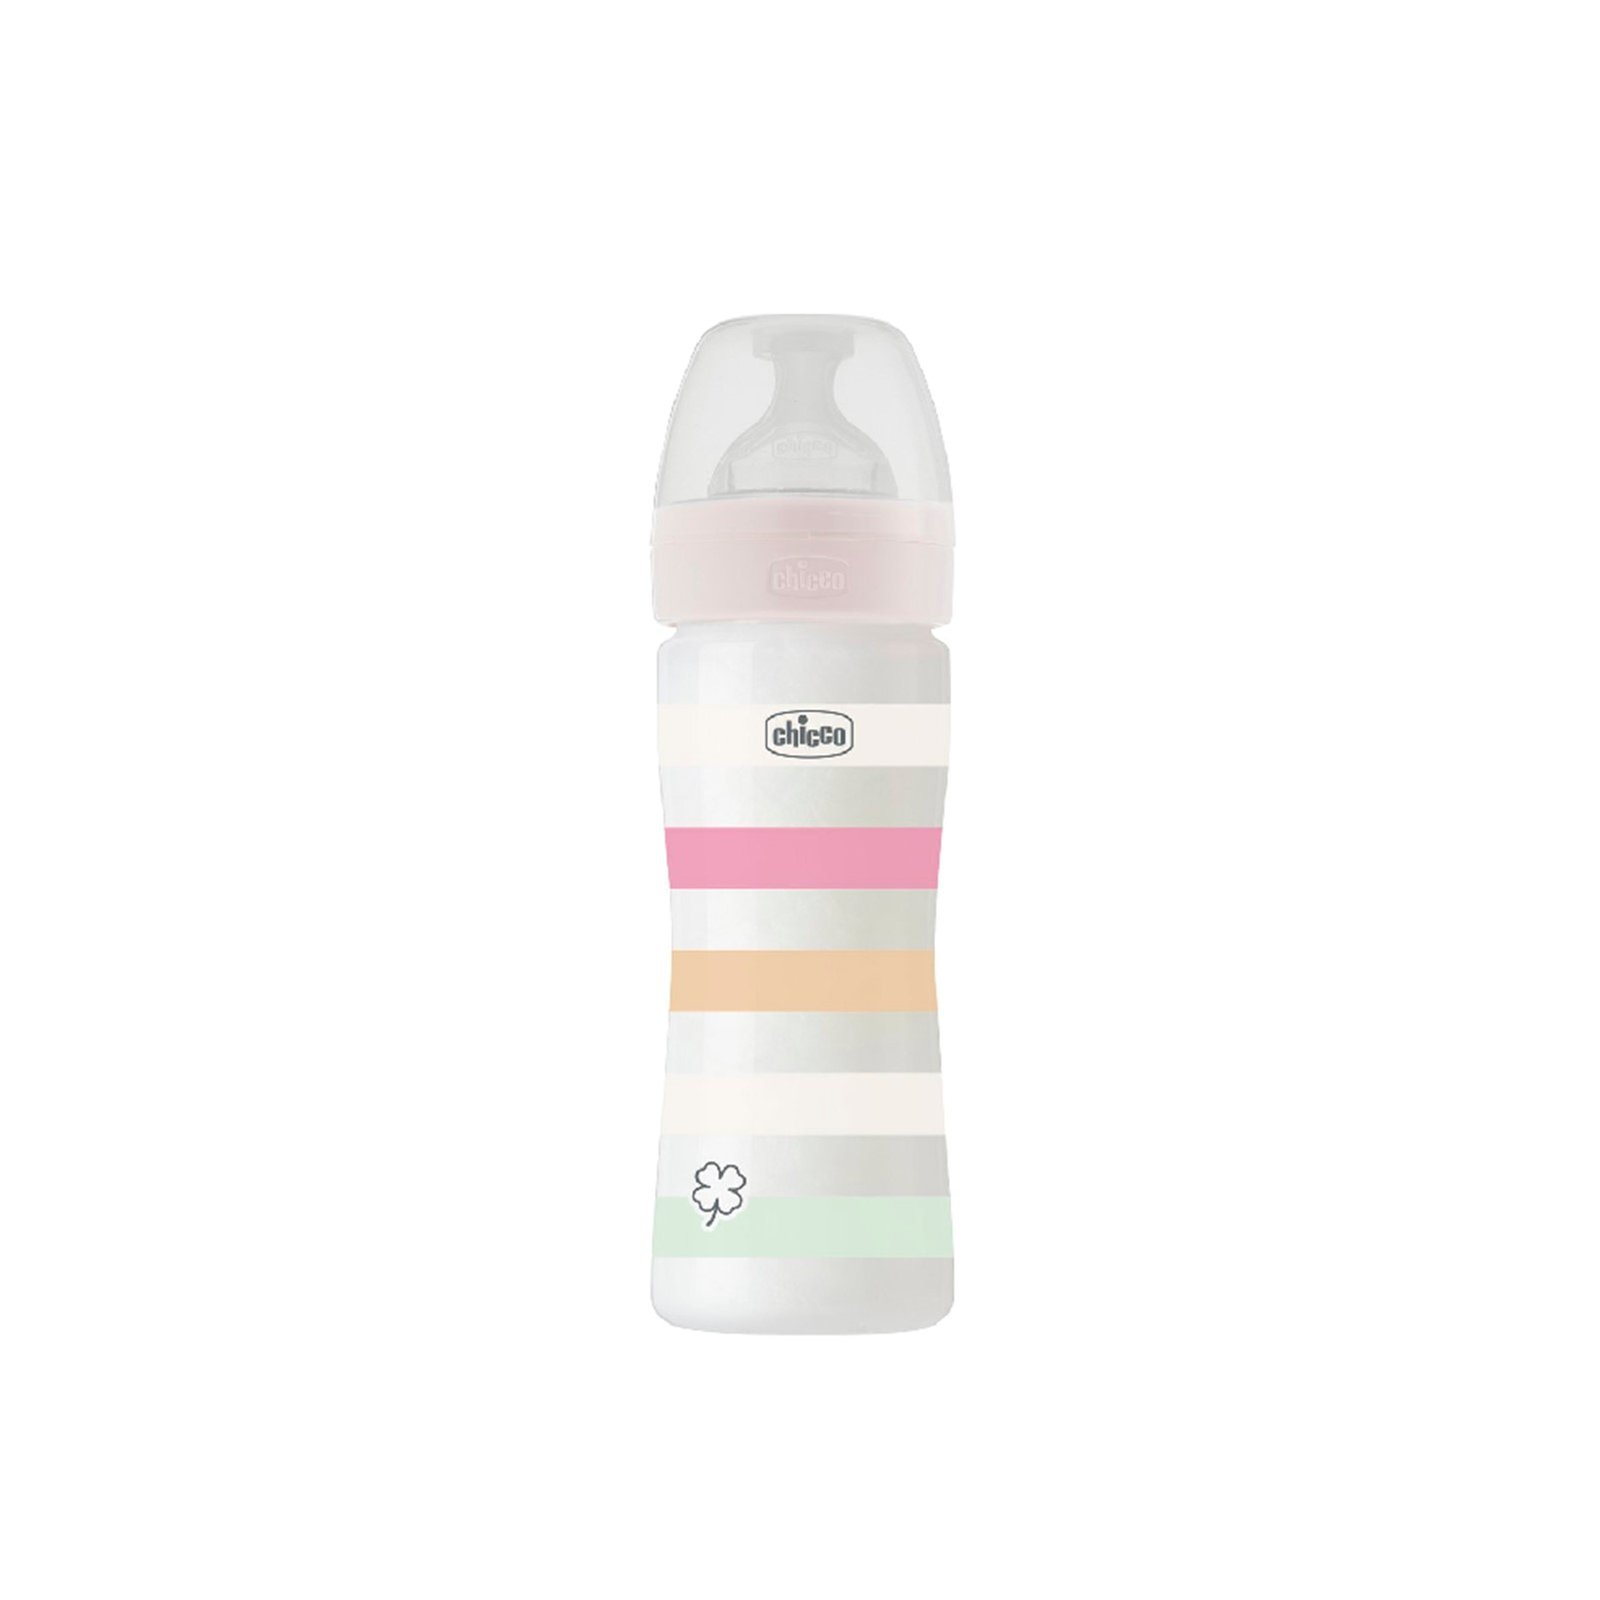 Chicco Well-Being Colors Bottle 2m+ White 250ml (9 fl oz)